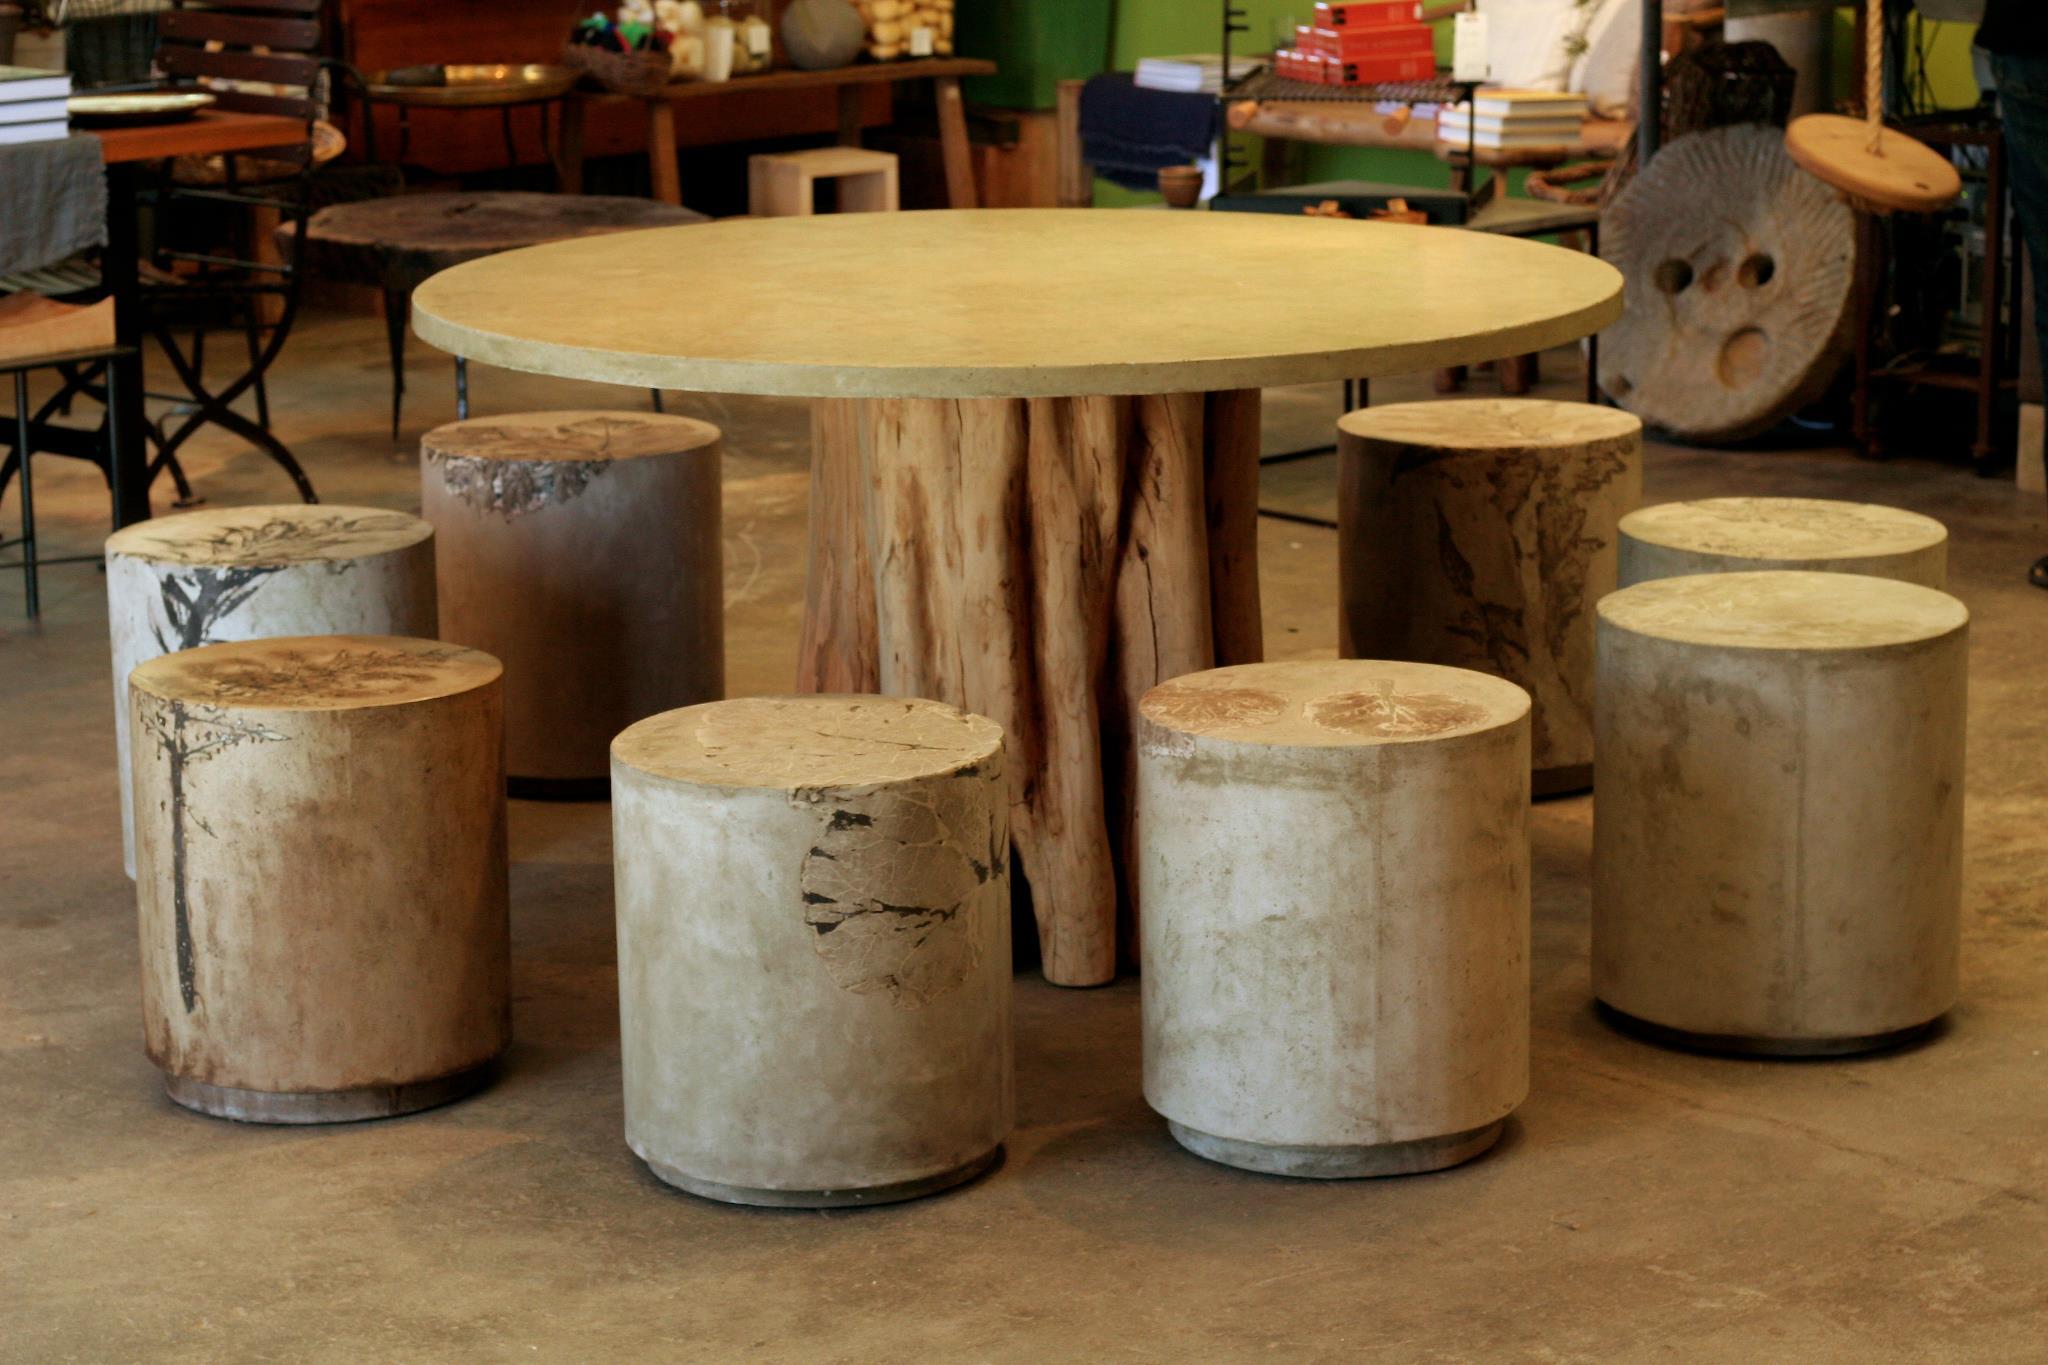 American Customizable Round Concrete Stools & Side Tables with Leaf Impressions, 'Pliny' For Sale